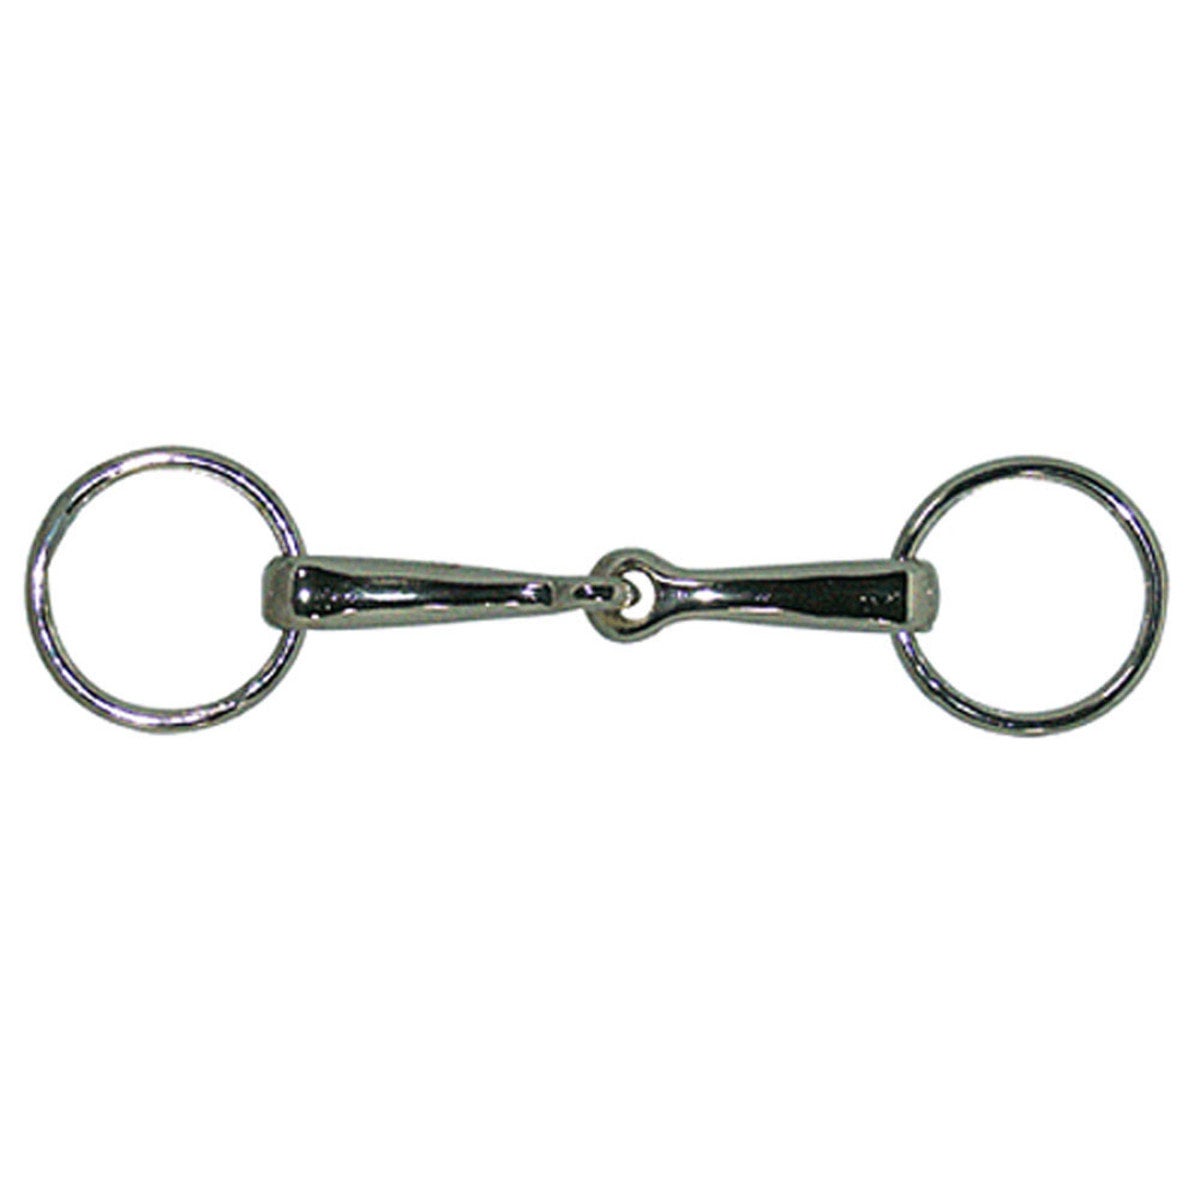 Shiloh Stables and Tack: Bits, O-Ring and D-Ring Bits